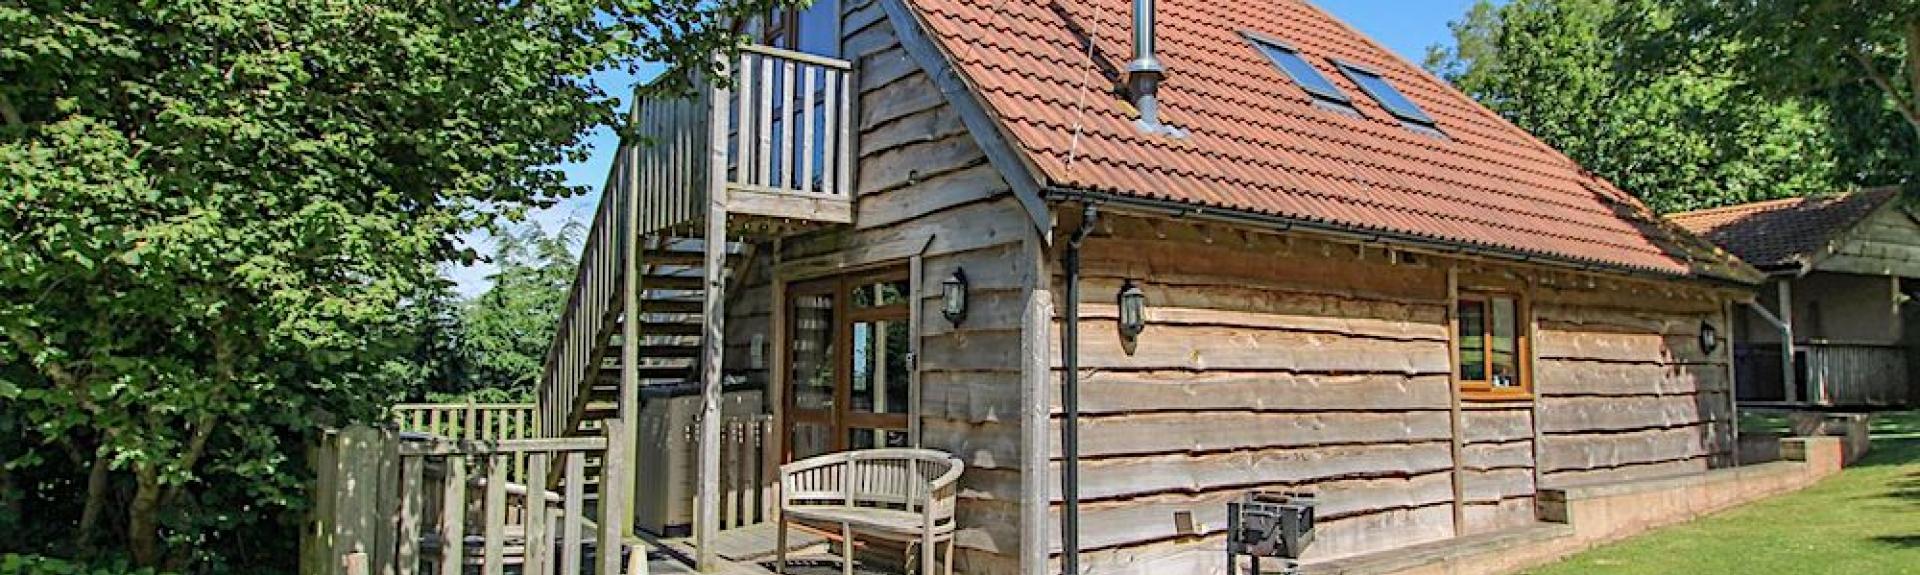 Large timber eco-holiday lodge with a hot tub and tree-lined lawn.